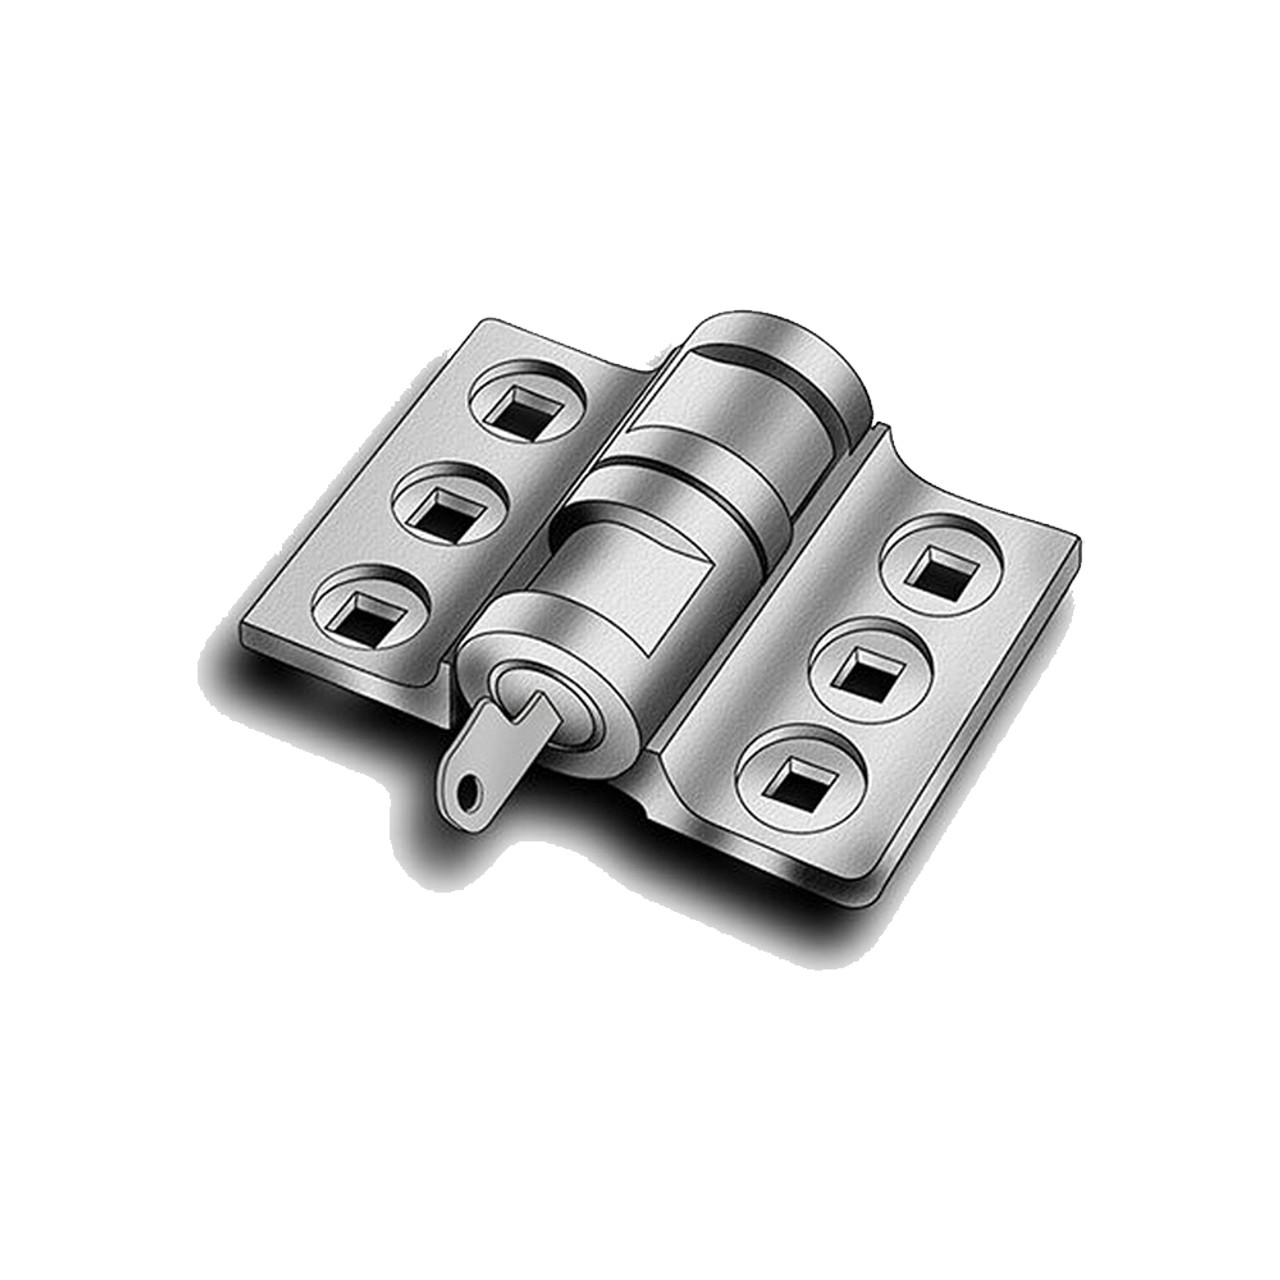 Tufloc 50-Series High-Security Door Locks for Vans and Buildings, Stainless Steel, Features Medeco high-security cylinders, Mounts to Fit Inward, Outward, Double-Swinging, Sliding and Roll-Up Doors, Criminal Resistant Design